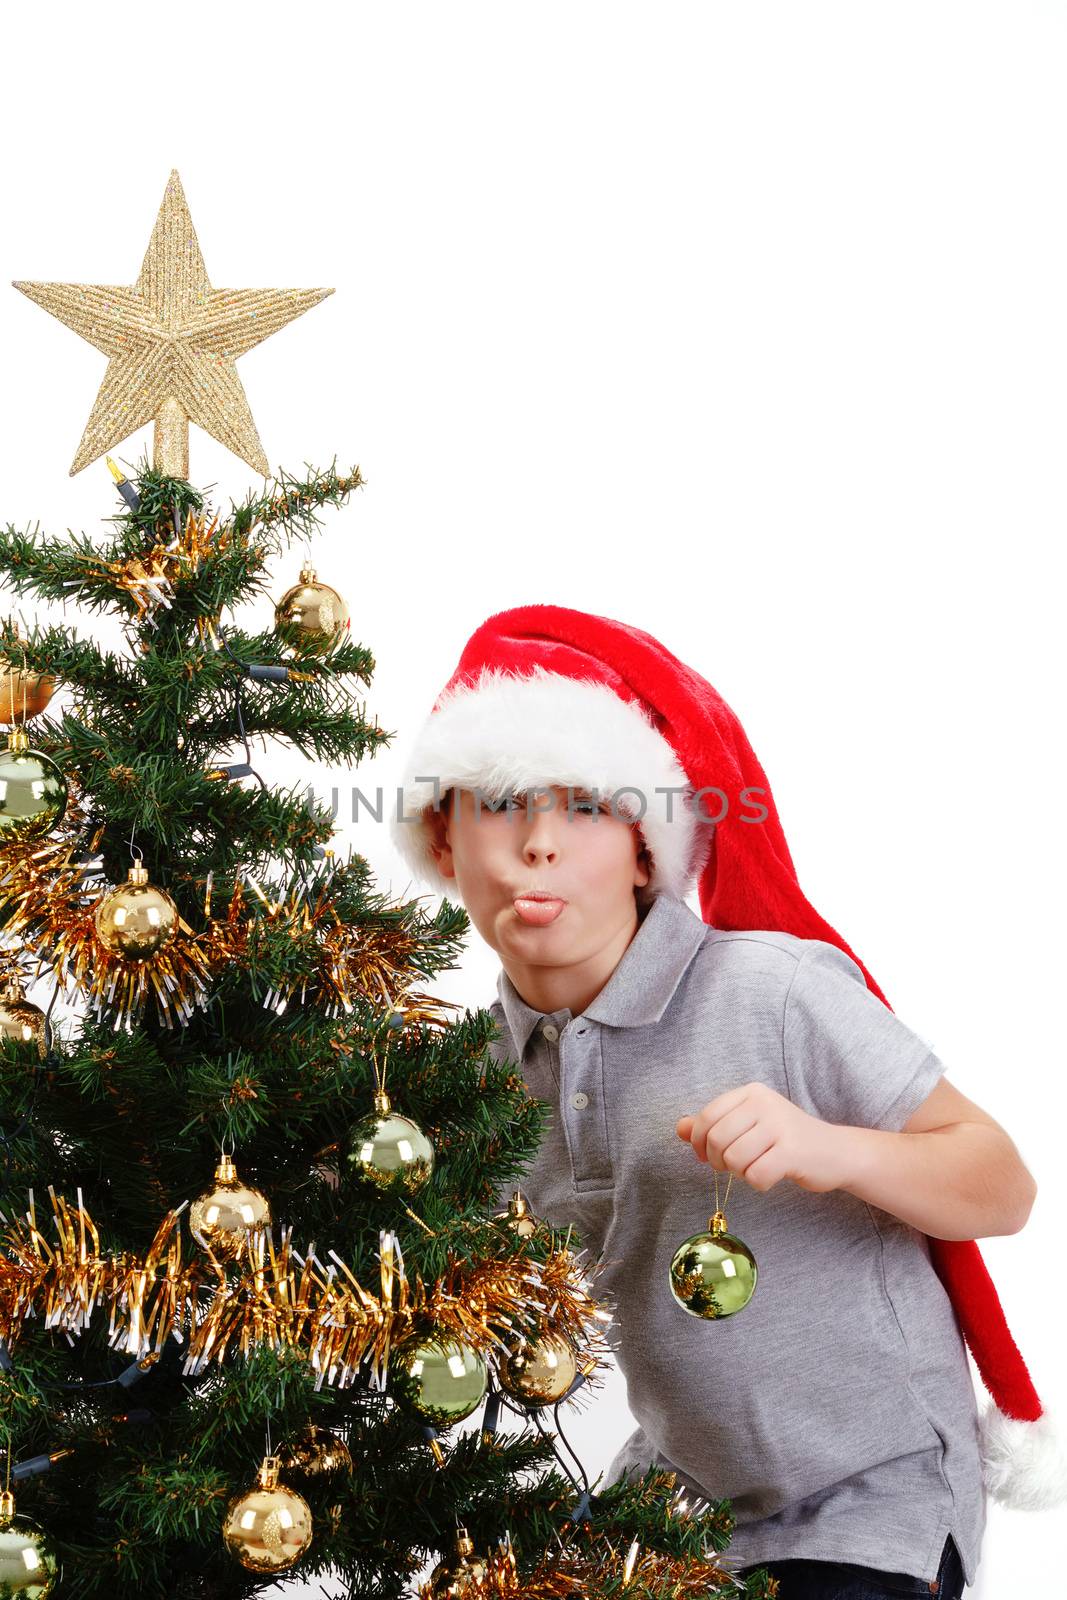 Boy with santa hat sticking out tongue at  the Christmas tree by artush